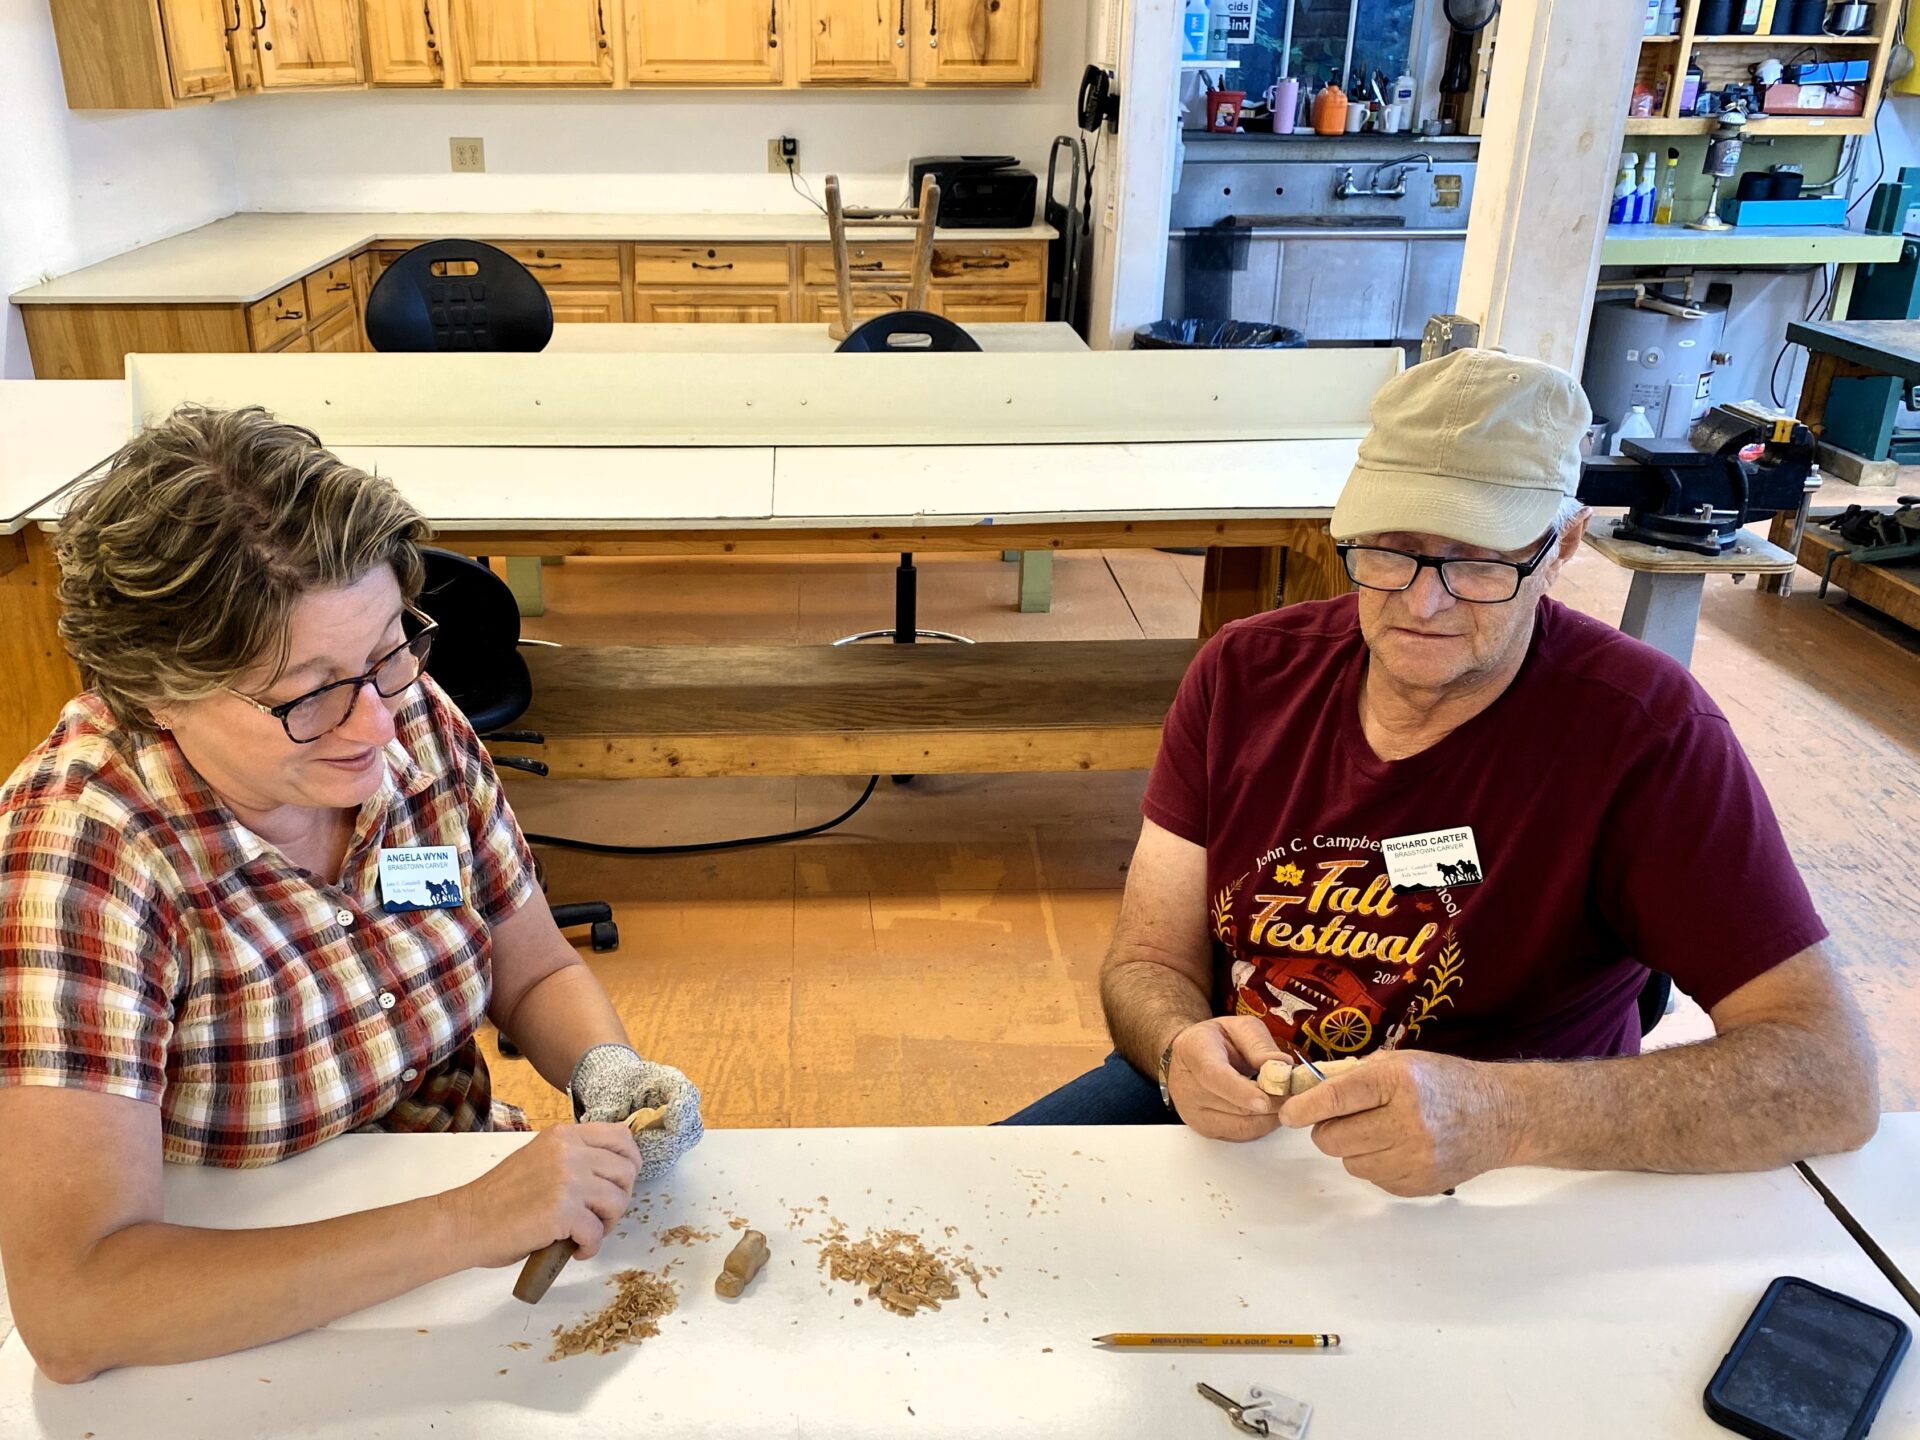 Two older adults sit at a table carving wood. One adult is female and the other is male.